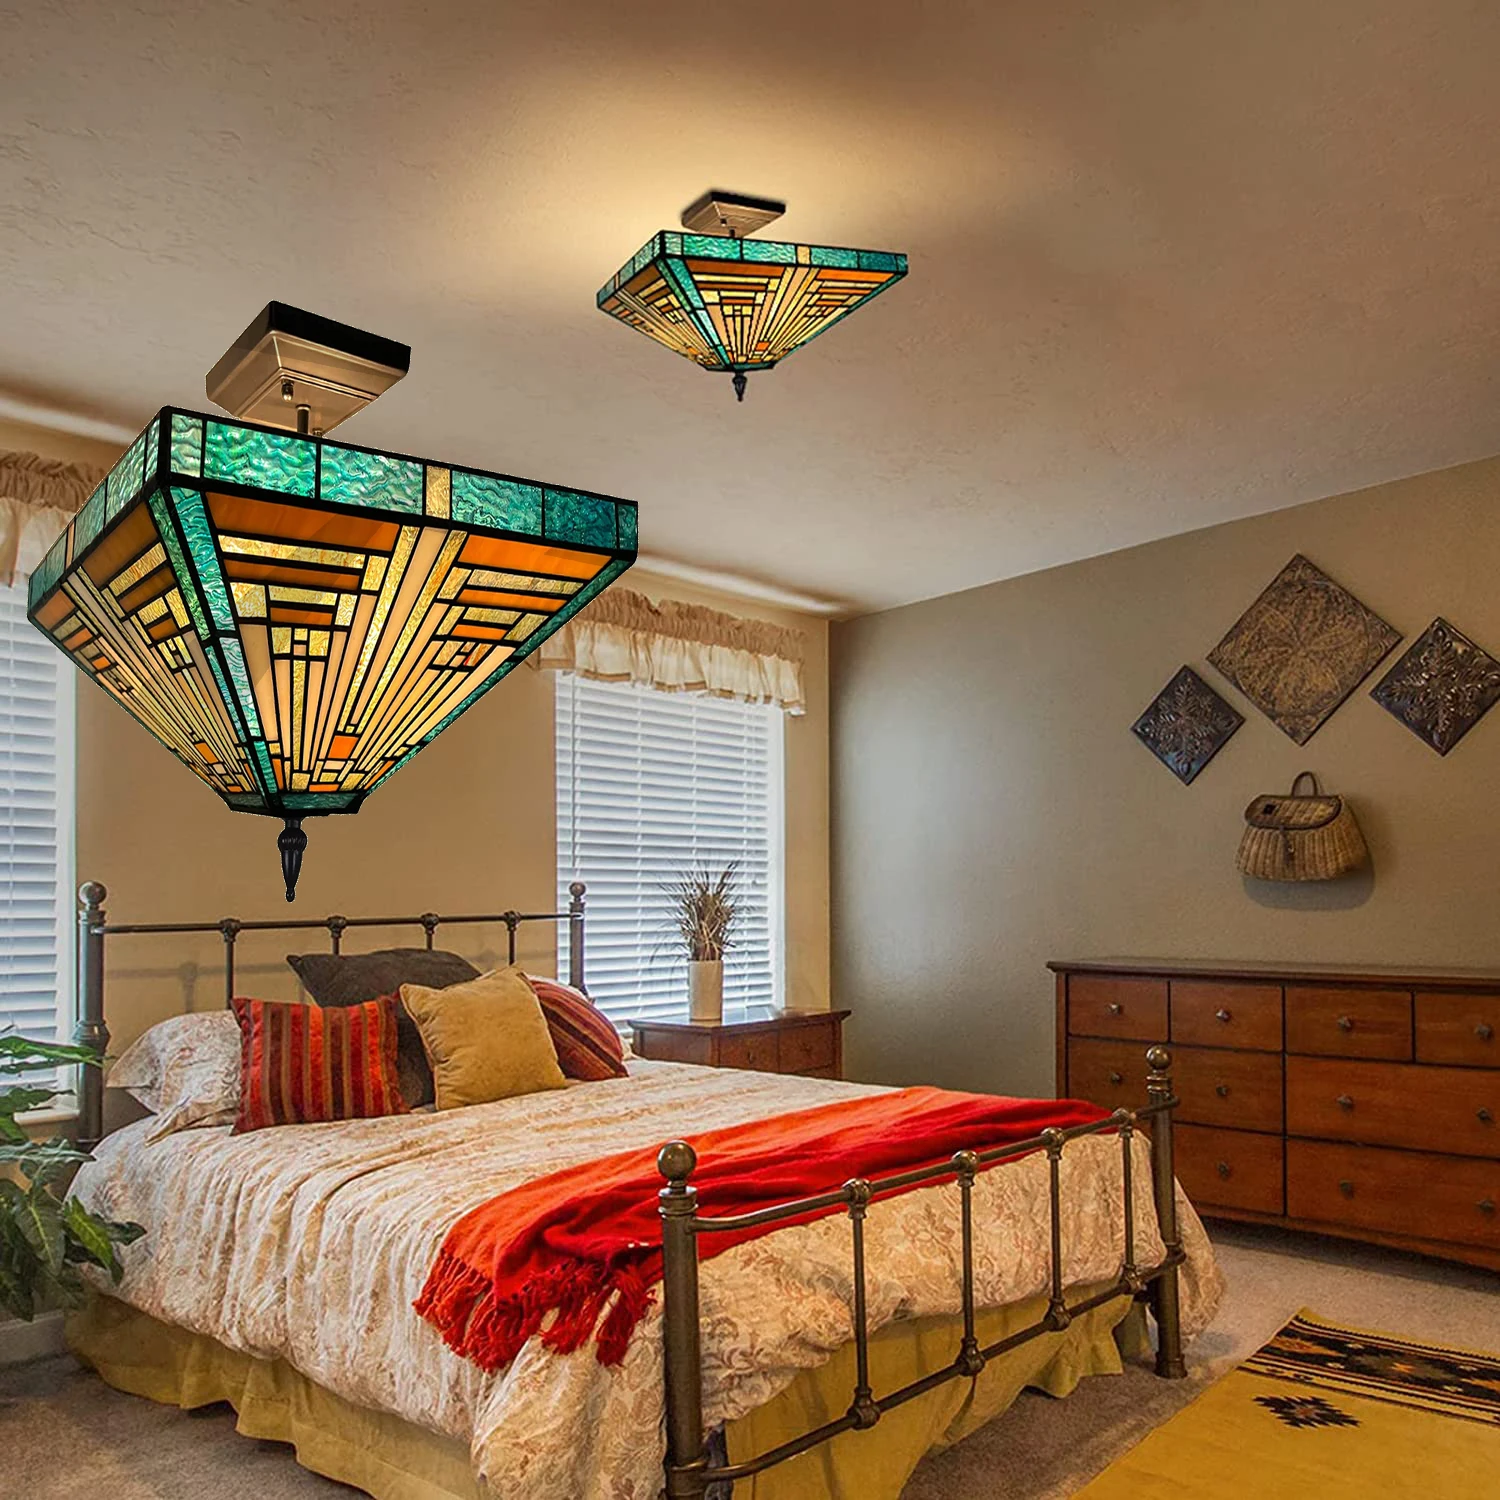 

Tiffany Semi Flush Mount Ceiling Light Vintage Mission Style Stained Glass Hang Light For Bedroom Dining Living Room Entryway